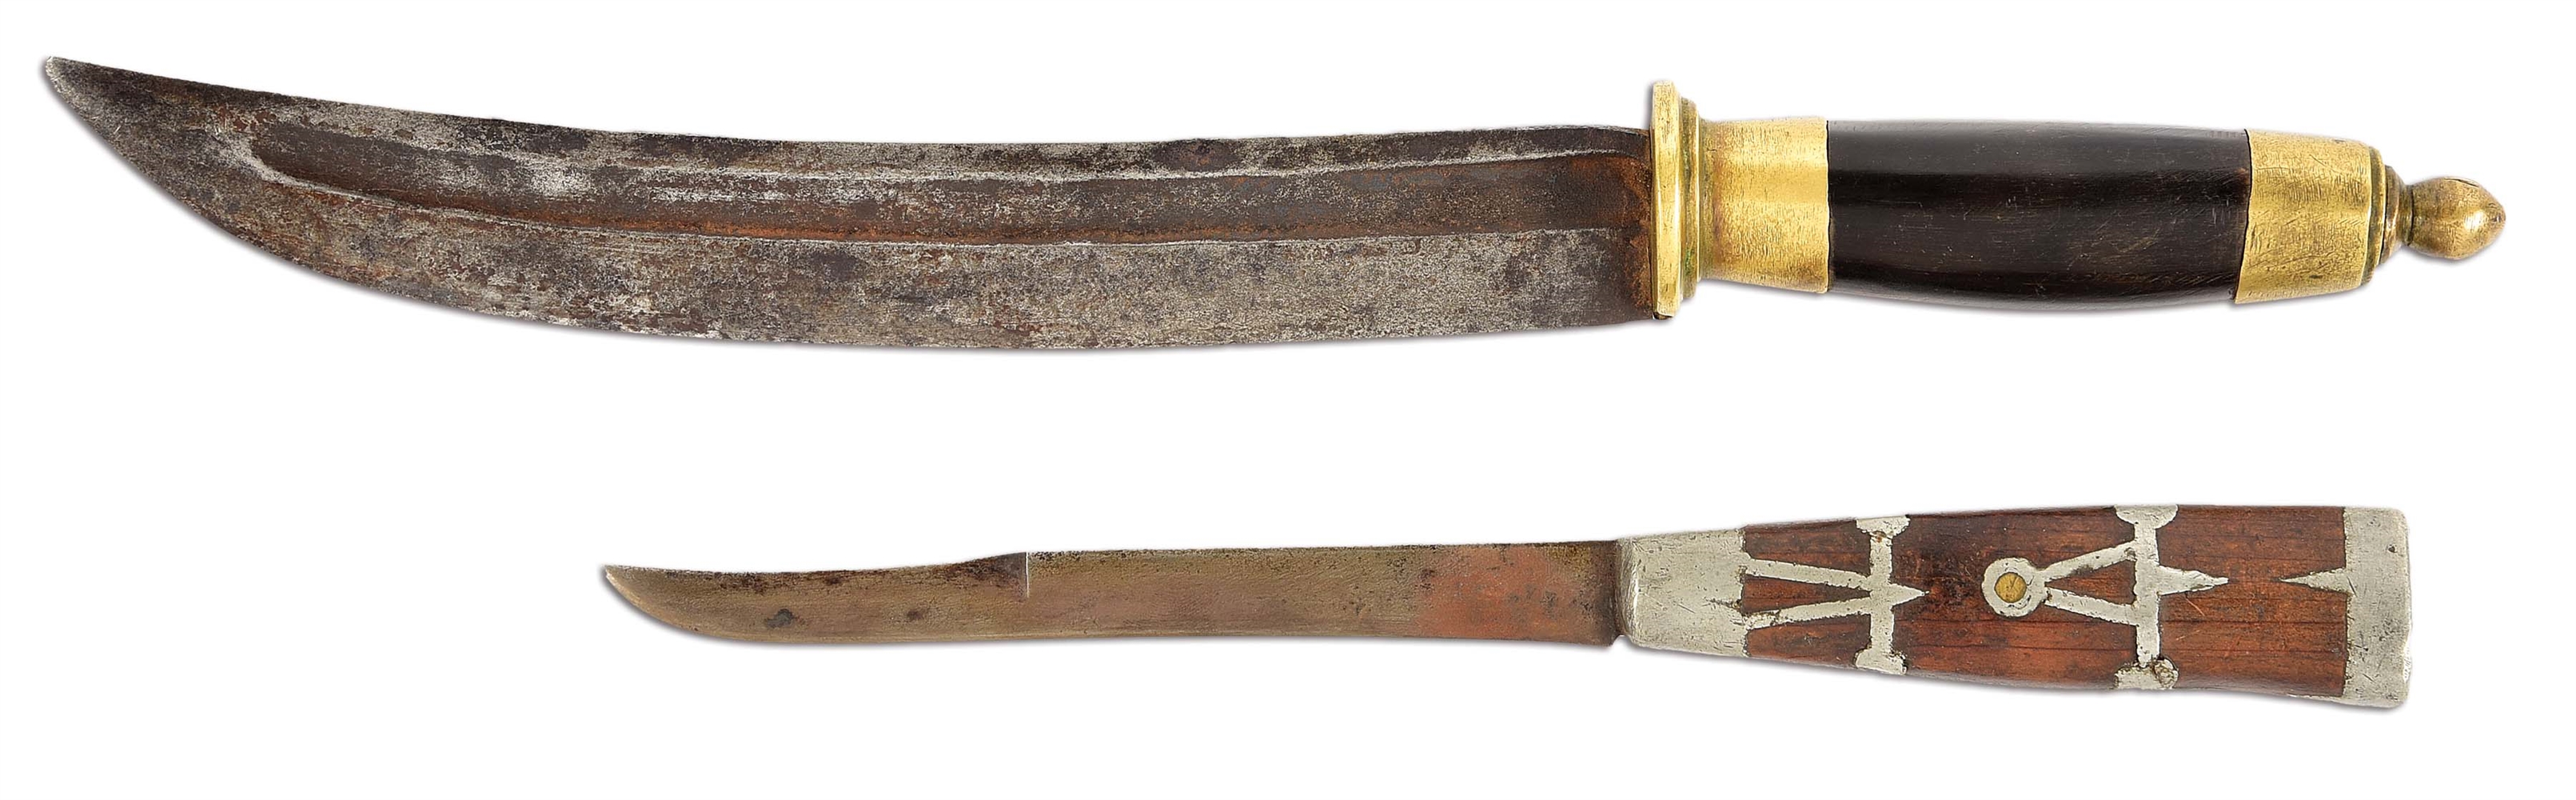 LOT OF 2: EARLY AMERICAN FIGHTING KNIFE WITH AN EARLY SKINNING KNIFE.